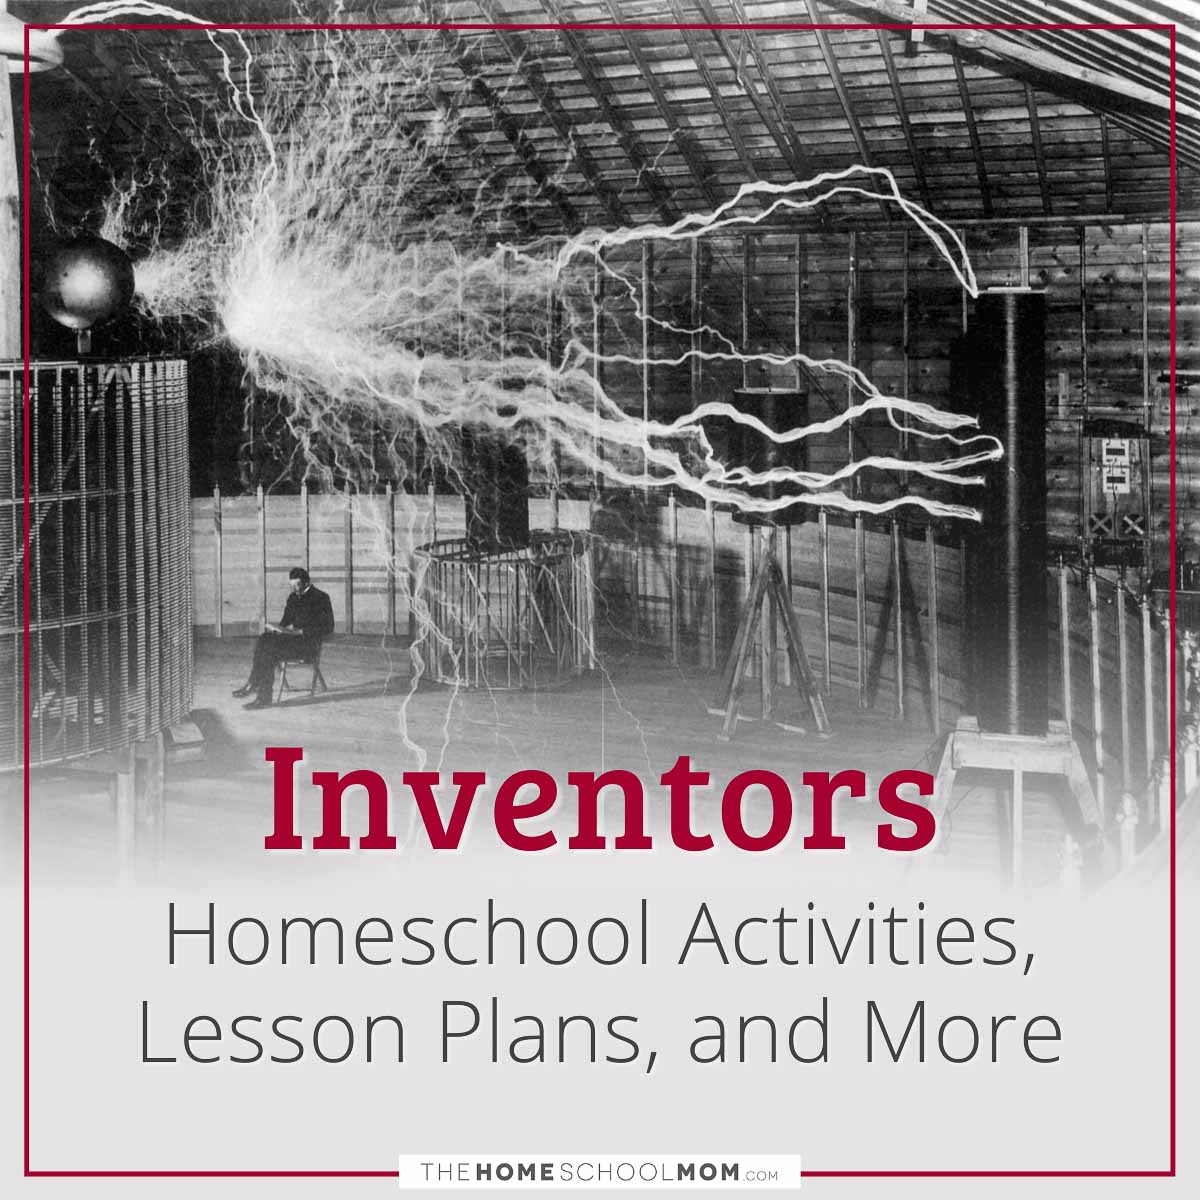 Inventors Homeschool Activities, Lesson Plans, and More.